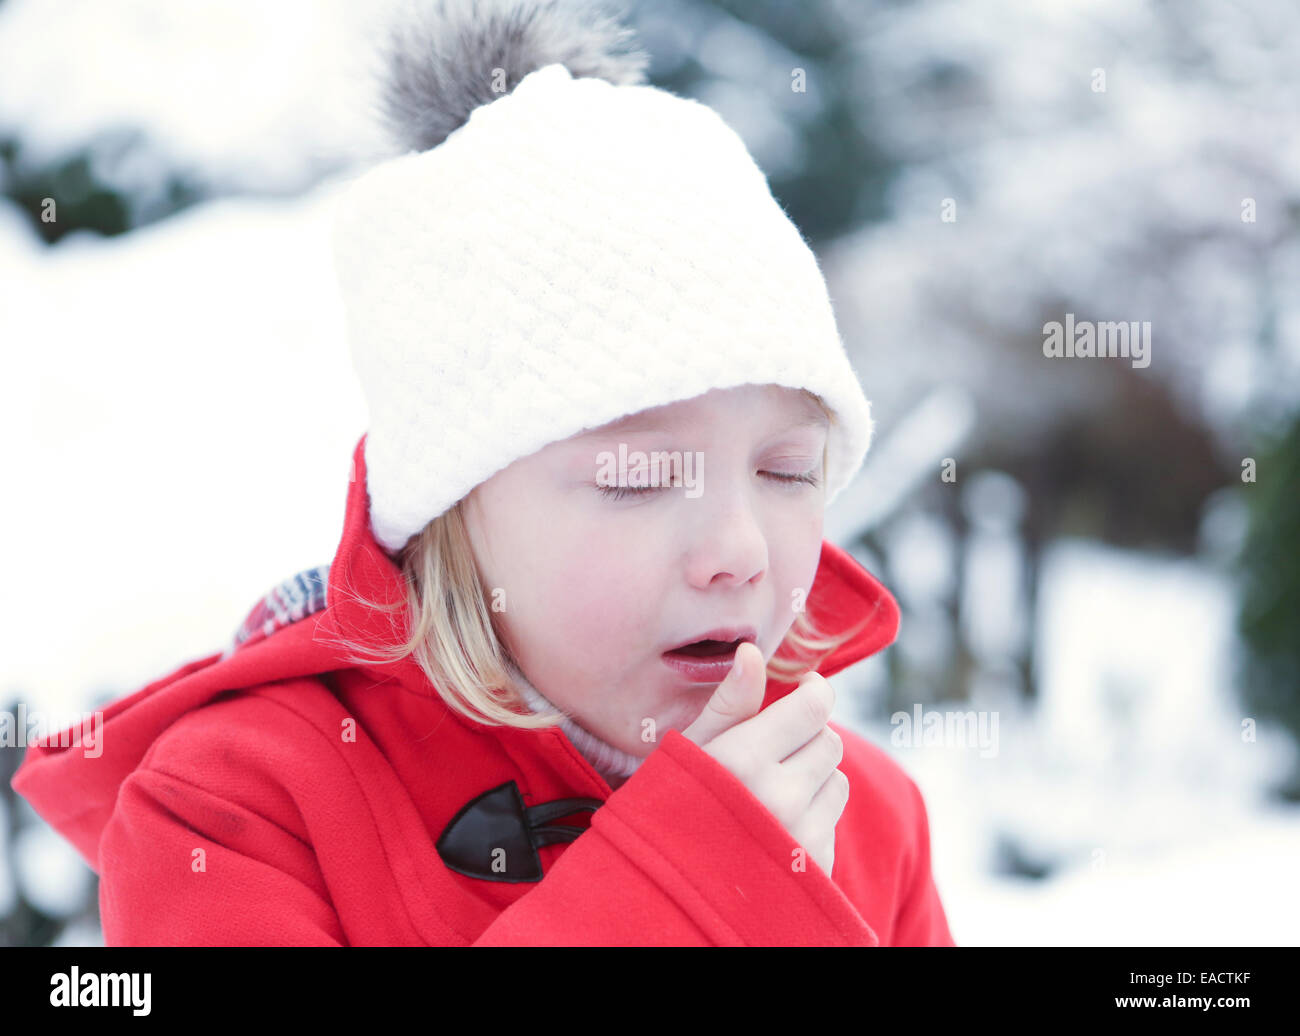 Sick girl coughing with flu in a snowy winter Stock Photo